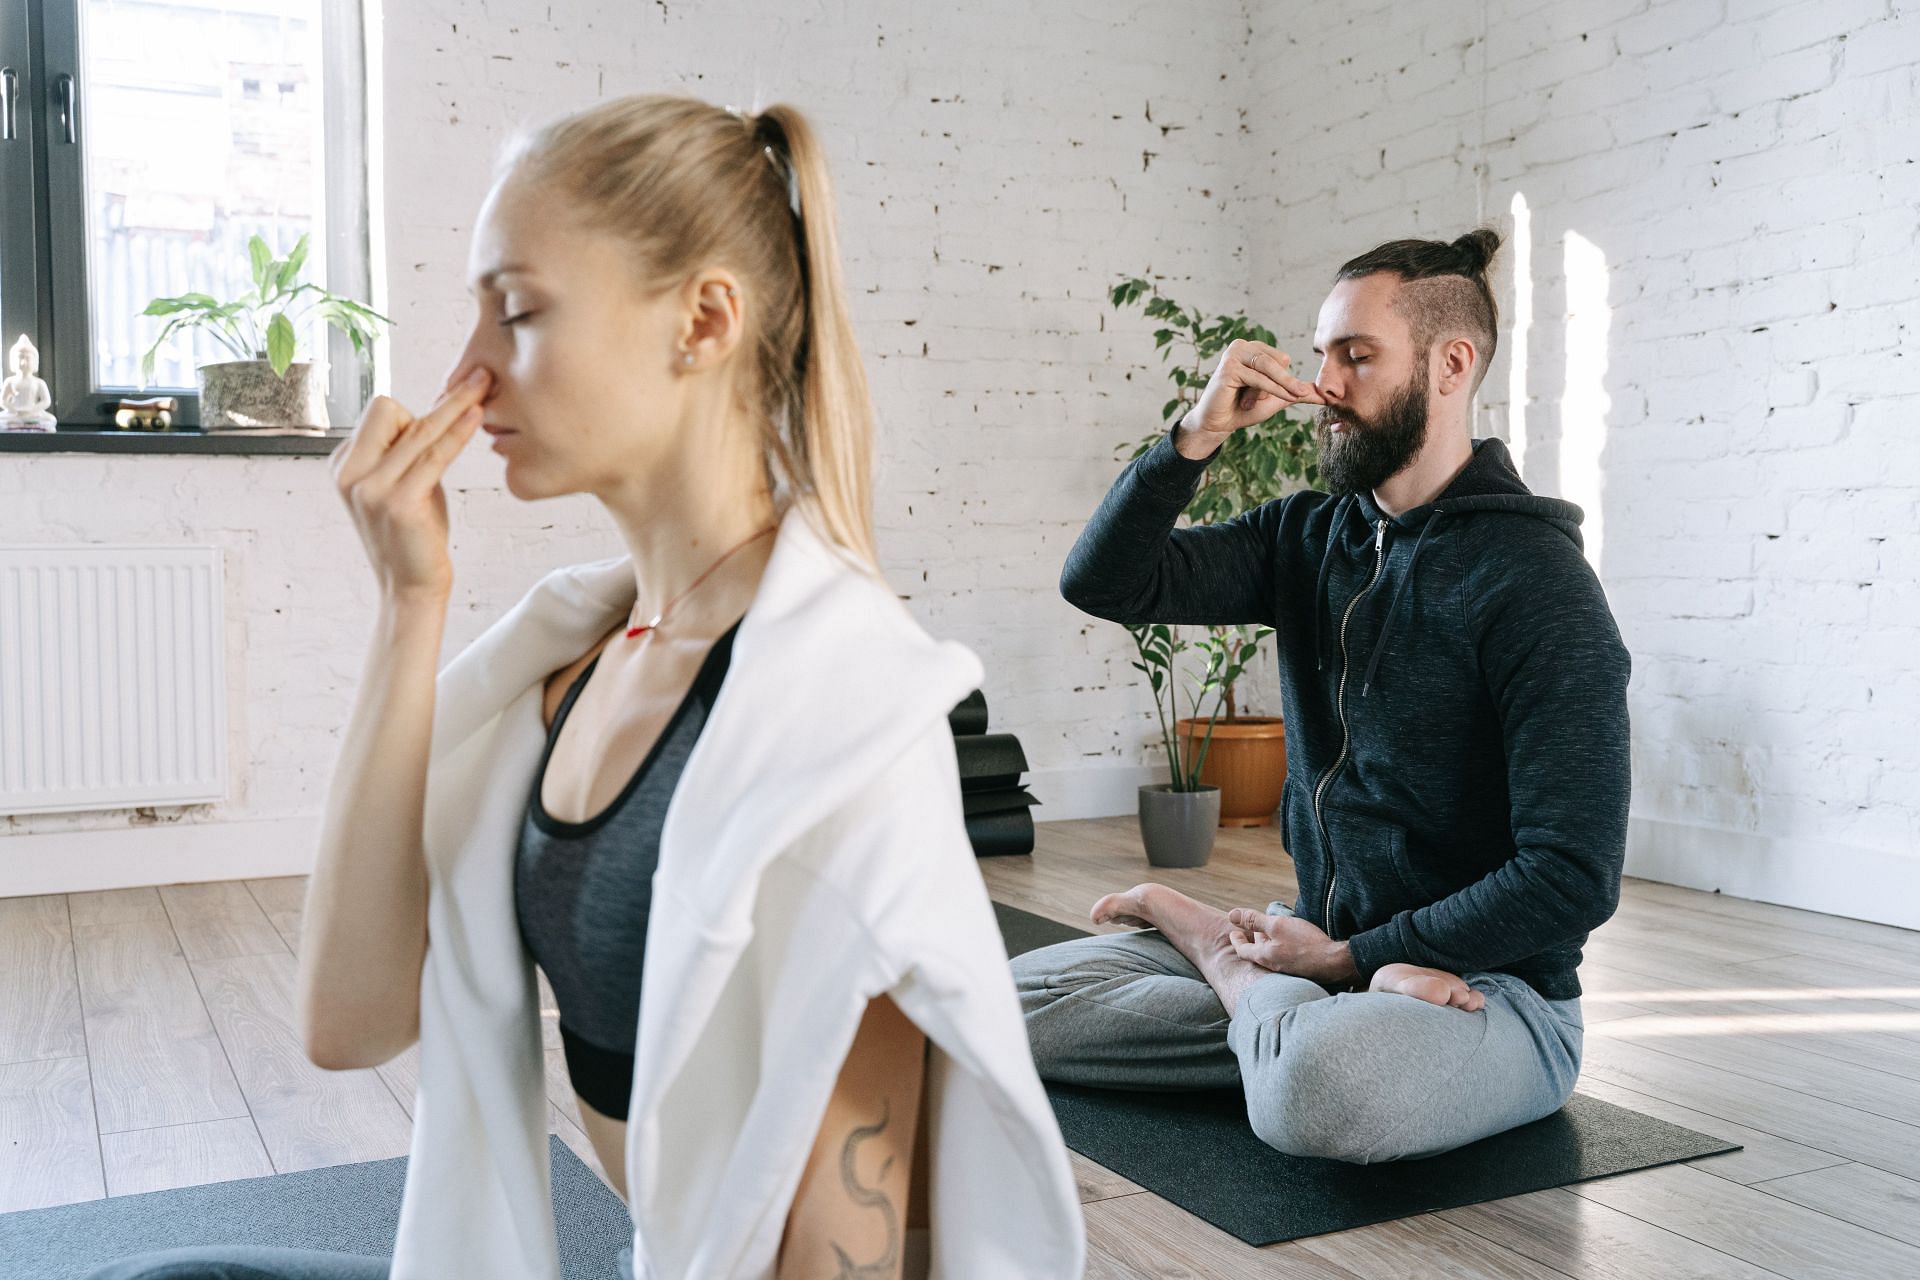 Breathing exercises are an excellent way to release stress and anxiety (Image via Pexels/ Ivan Samkov)